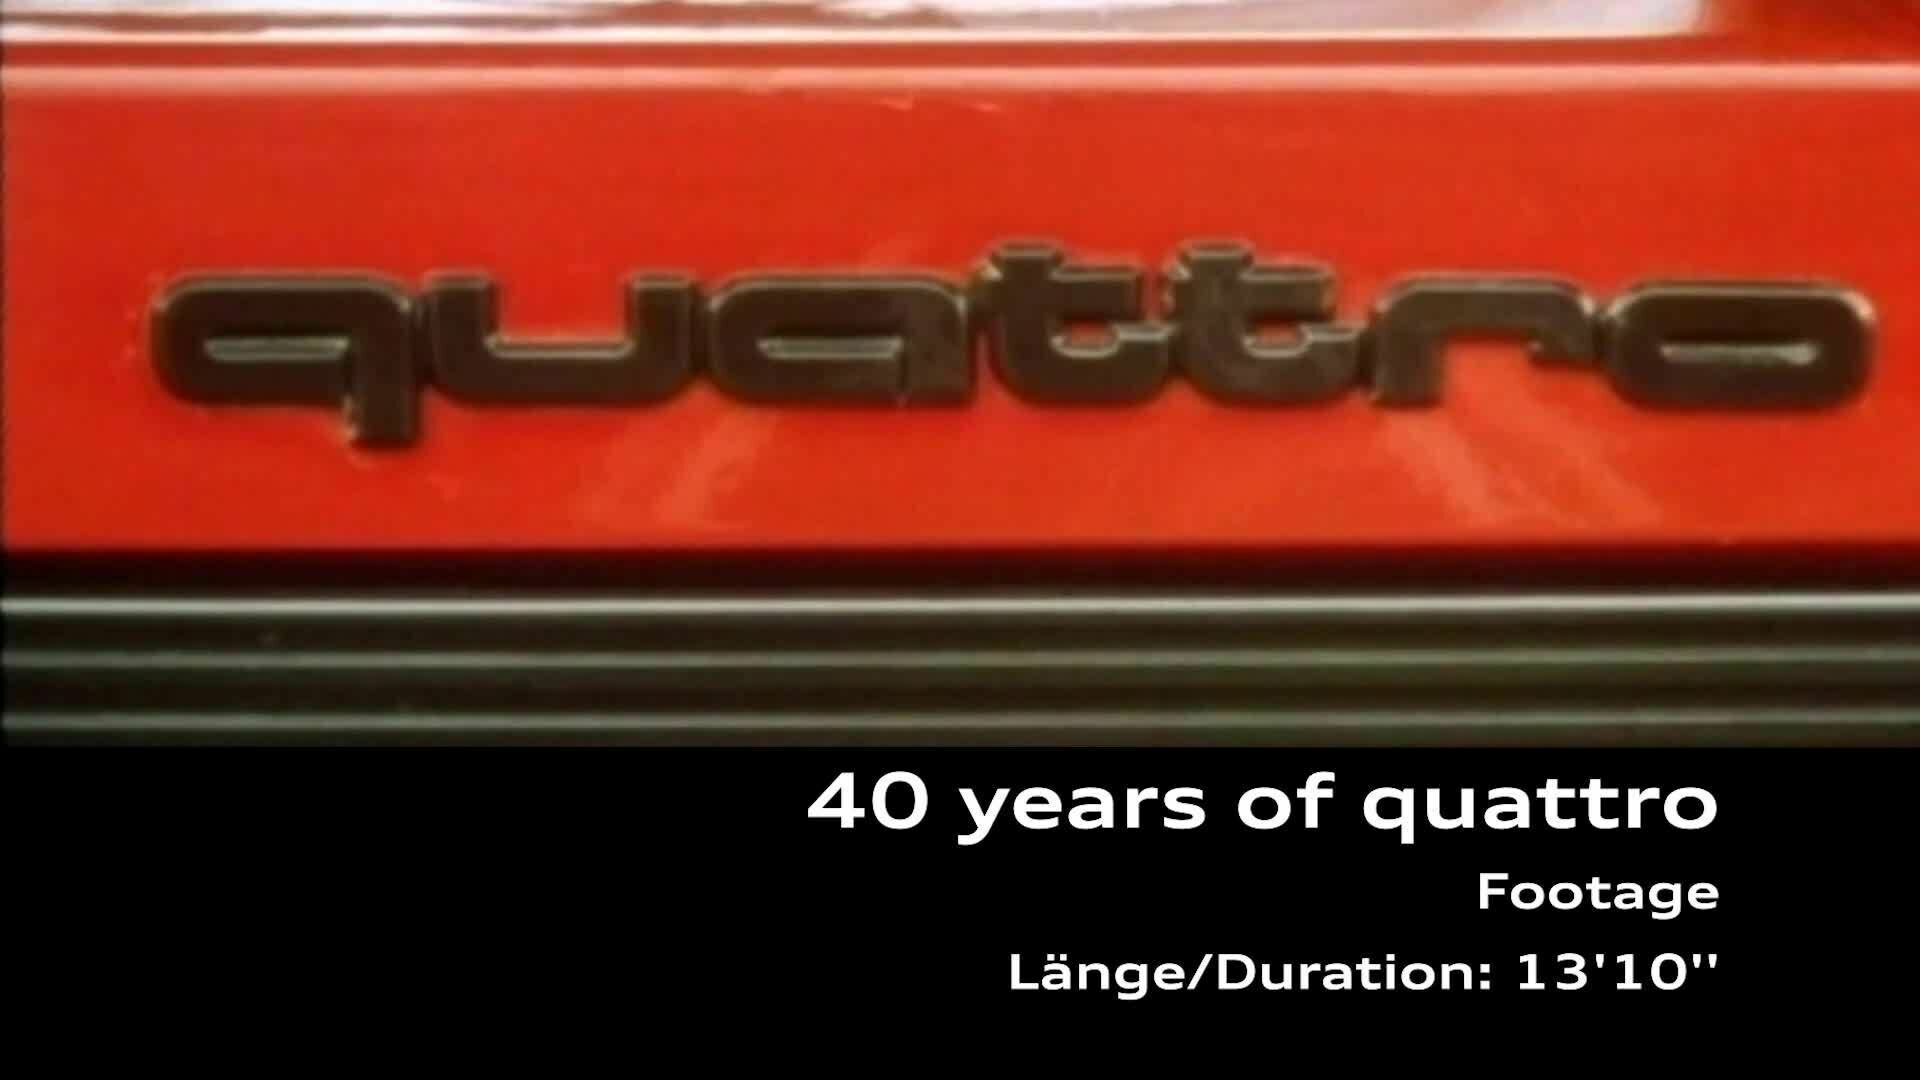 Footage: 40 years of quattro